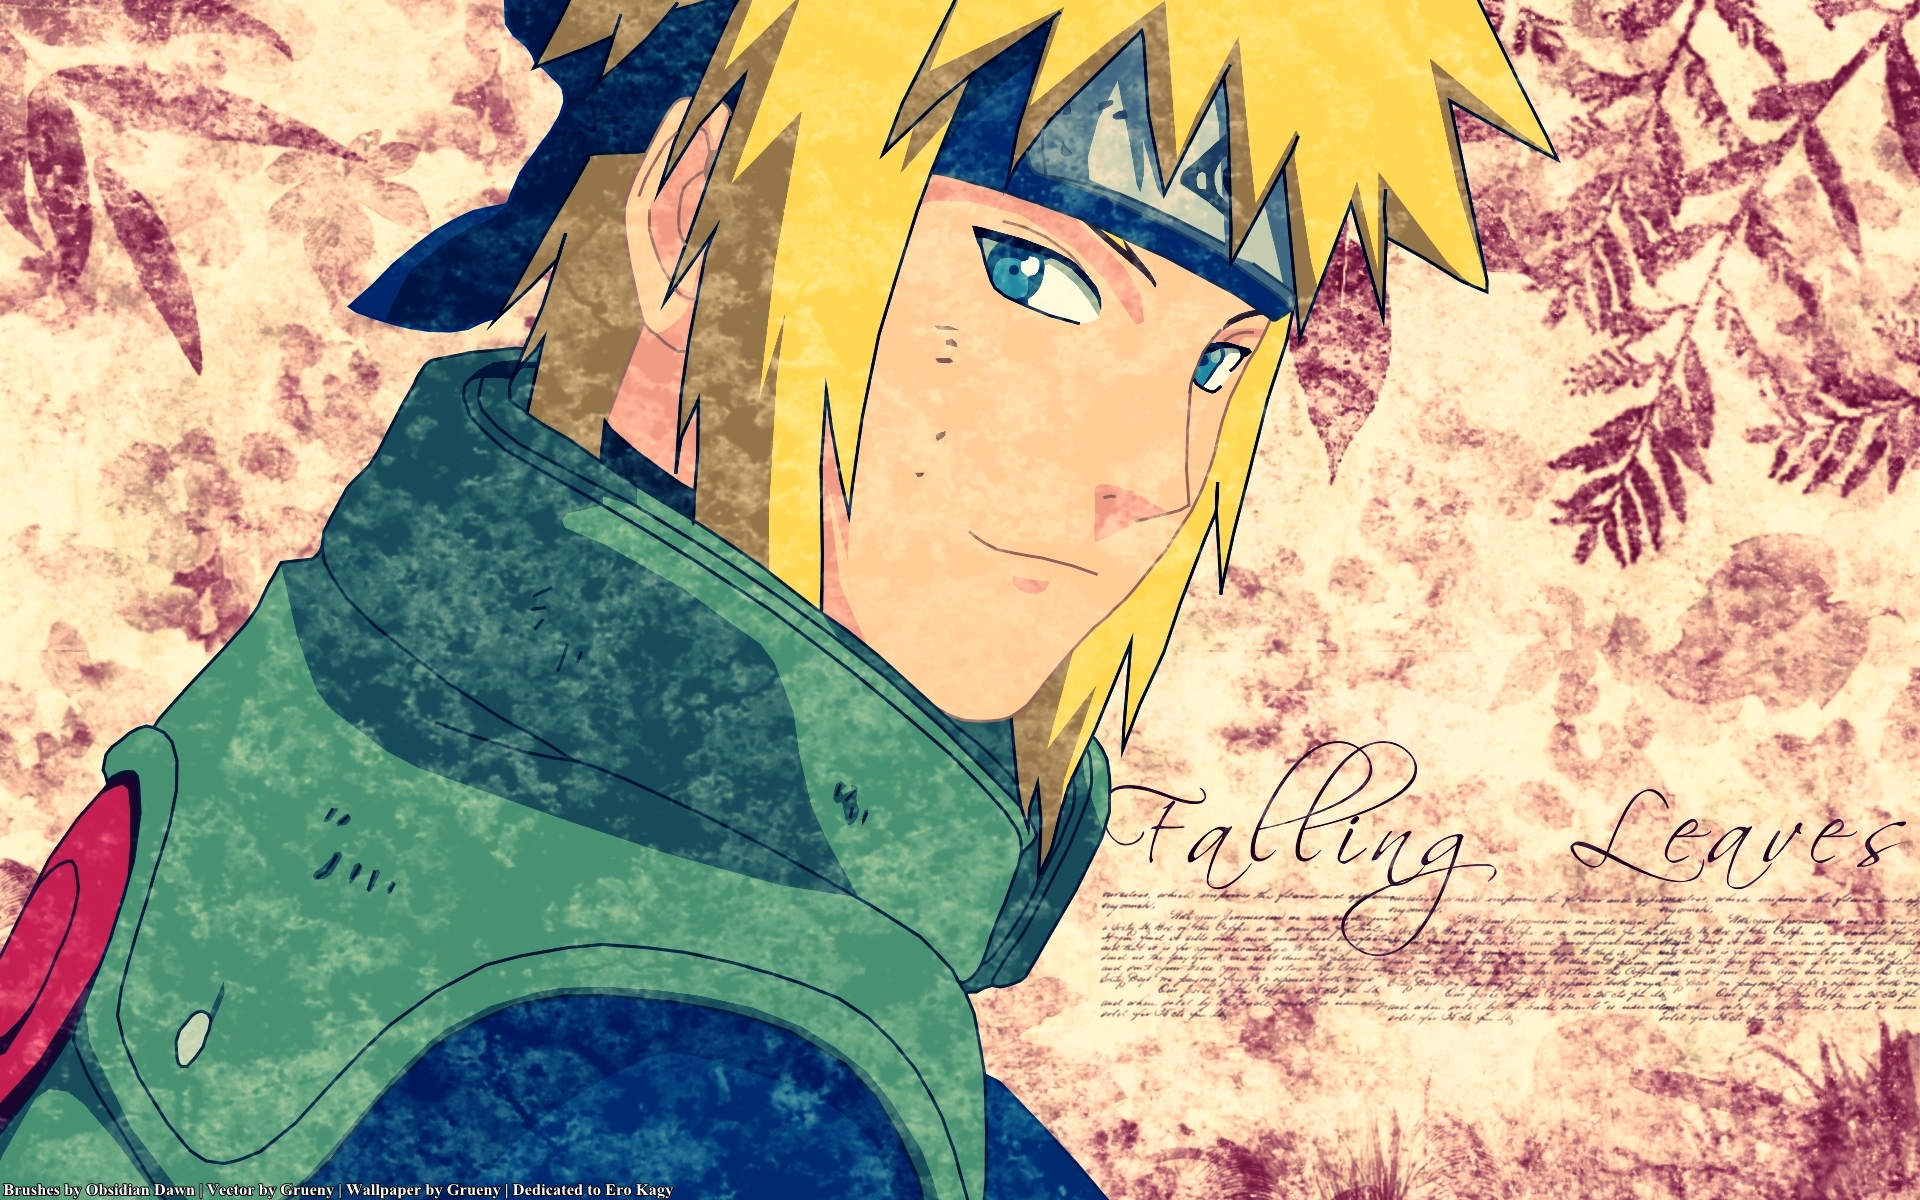 210+ Minato Namikaze HD Wallpapers and Backgrounds